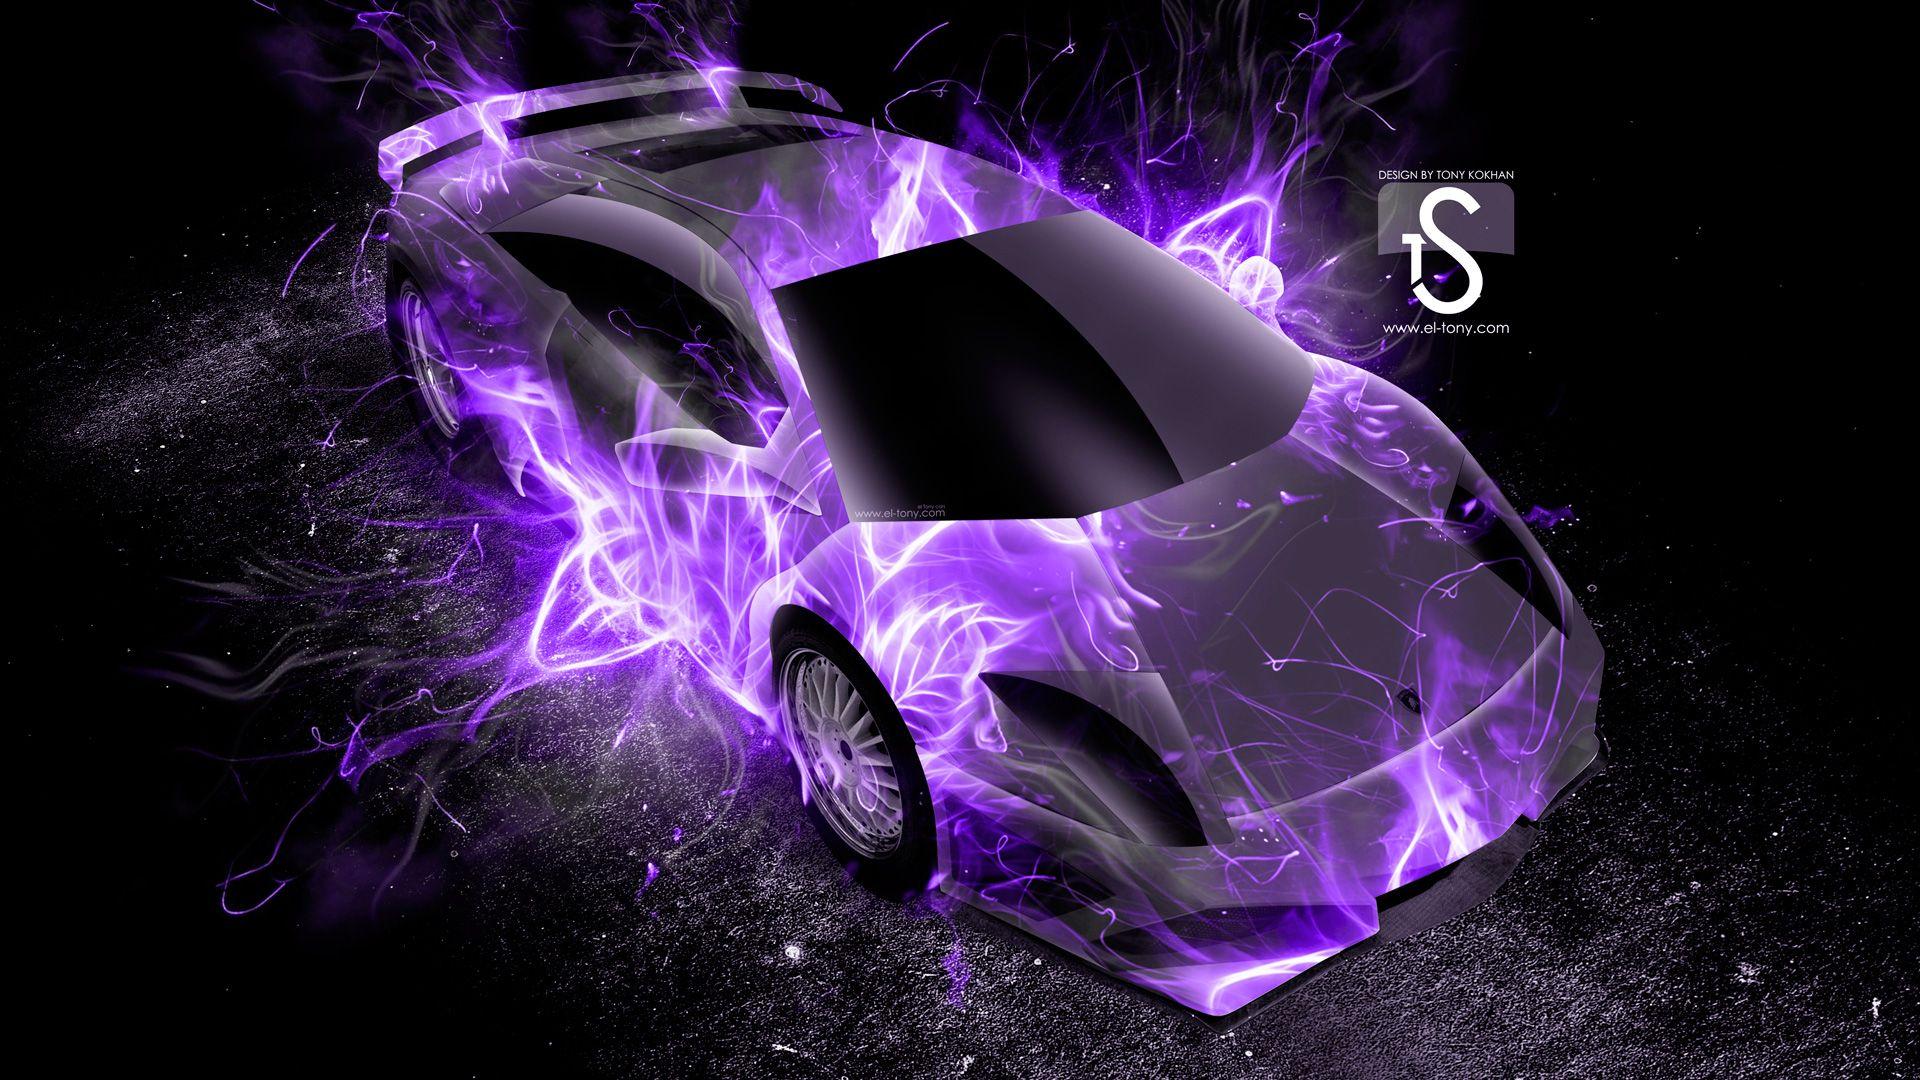 Neon Supercars Wallpapers - Top Free Neon Supercars Backgrounds